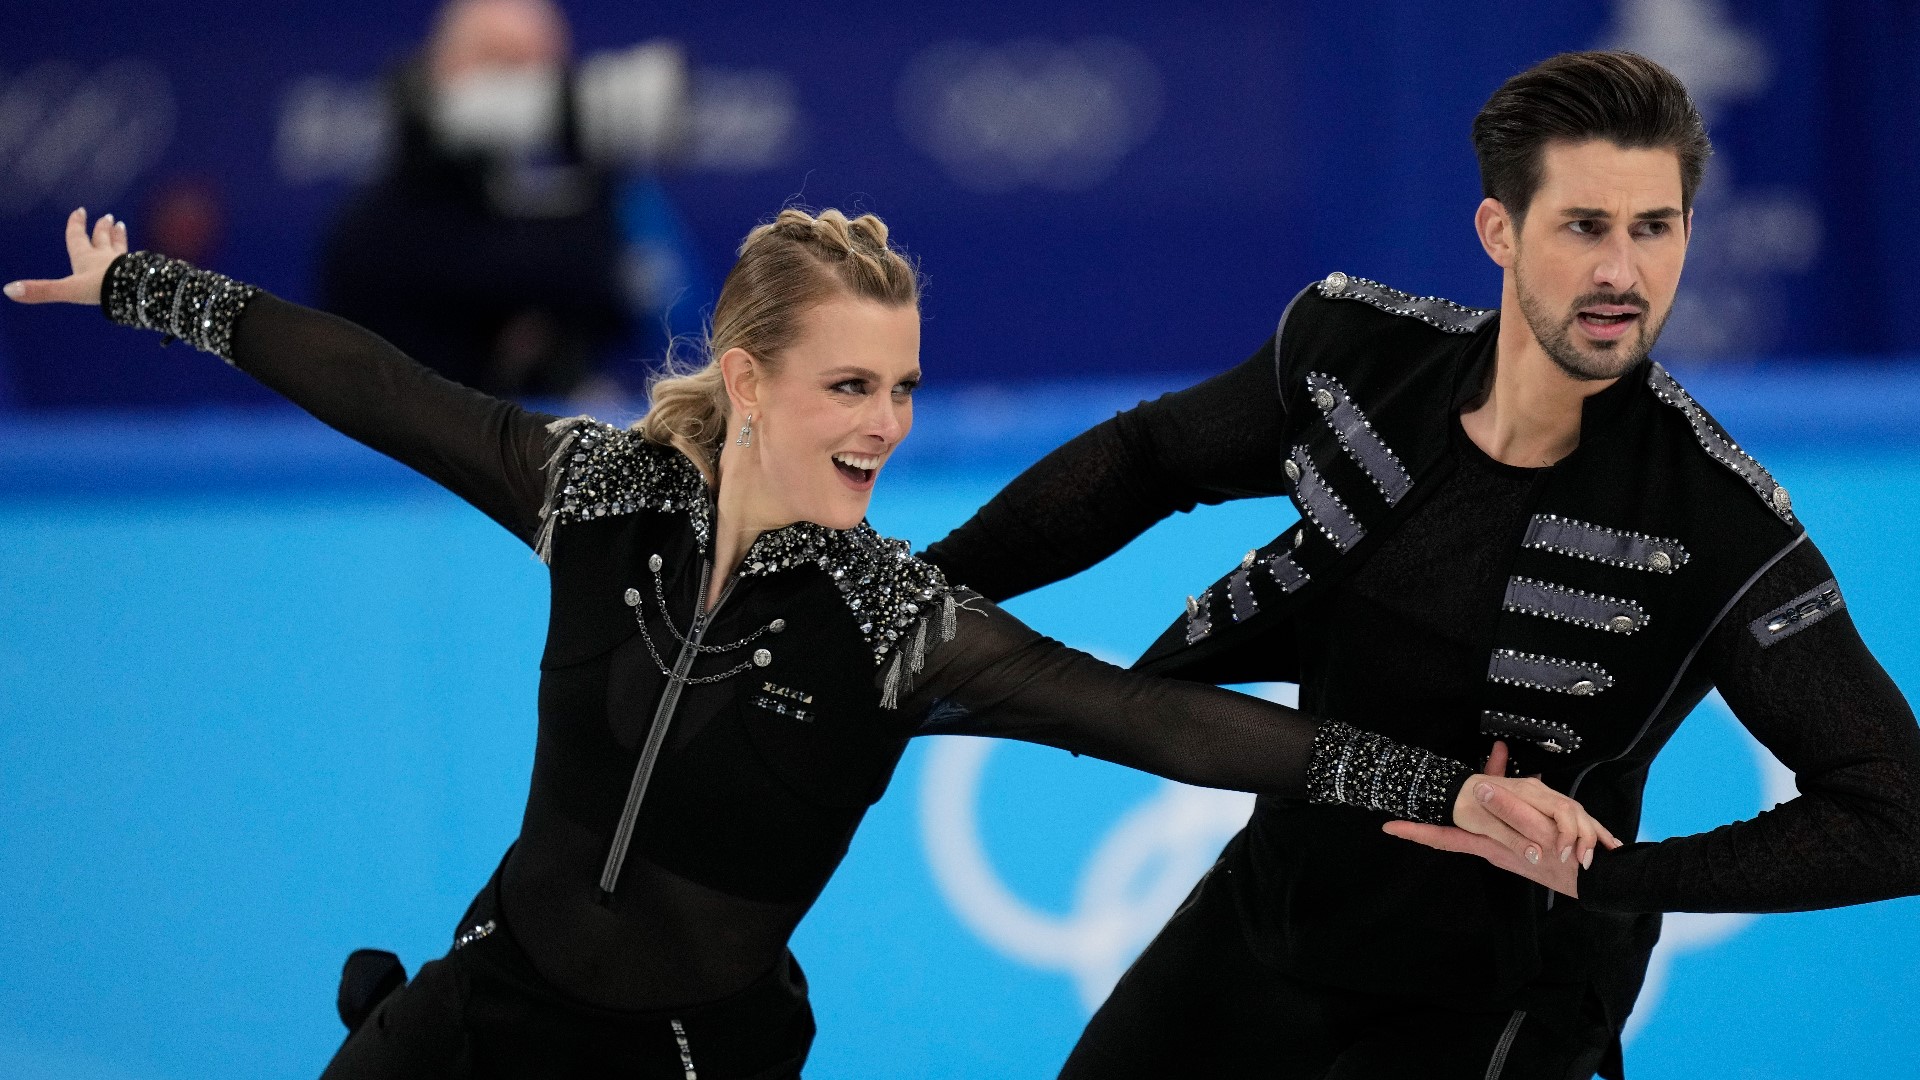 Three U.S. couples will take part in ice dancing Saturday, including two that had the top scores during the team figure skating event.